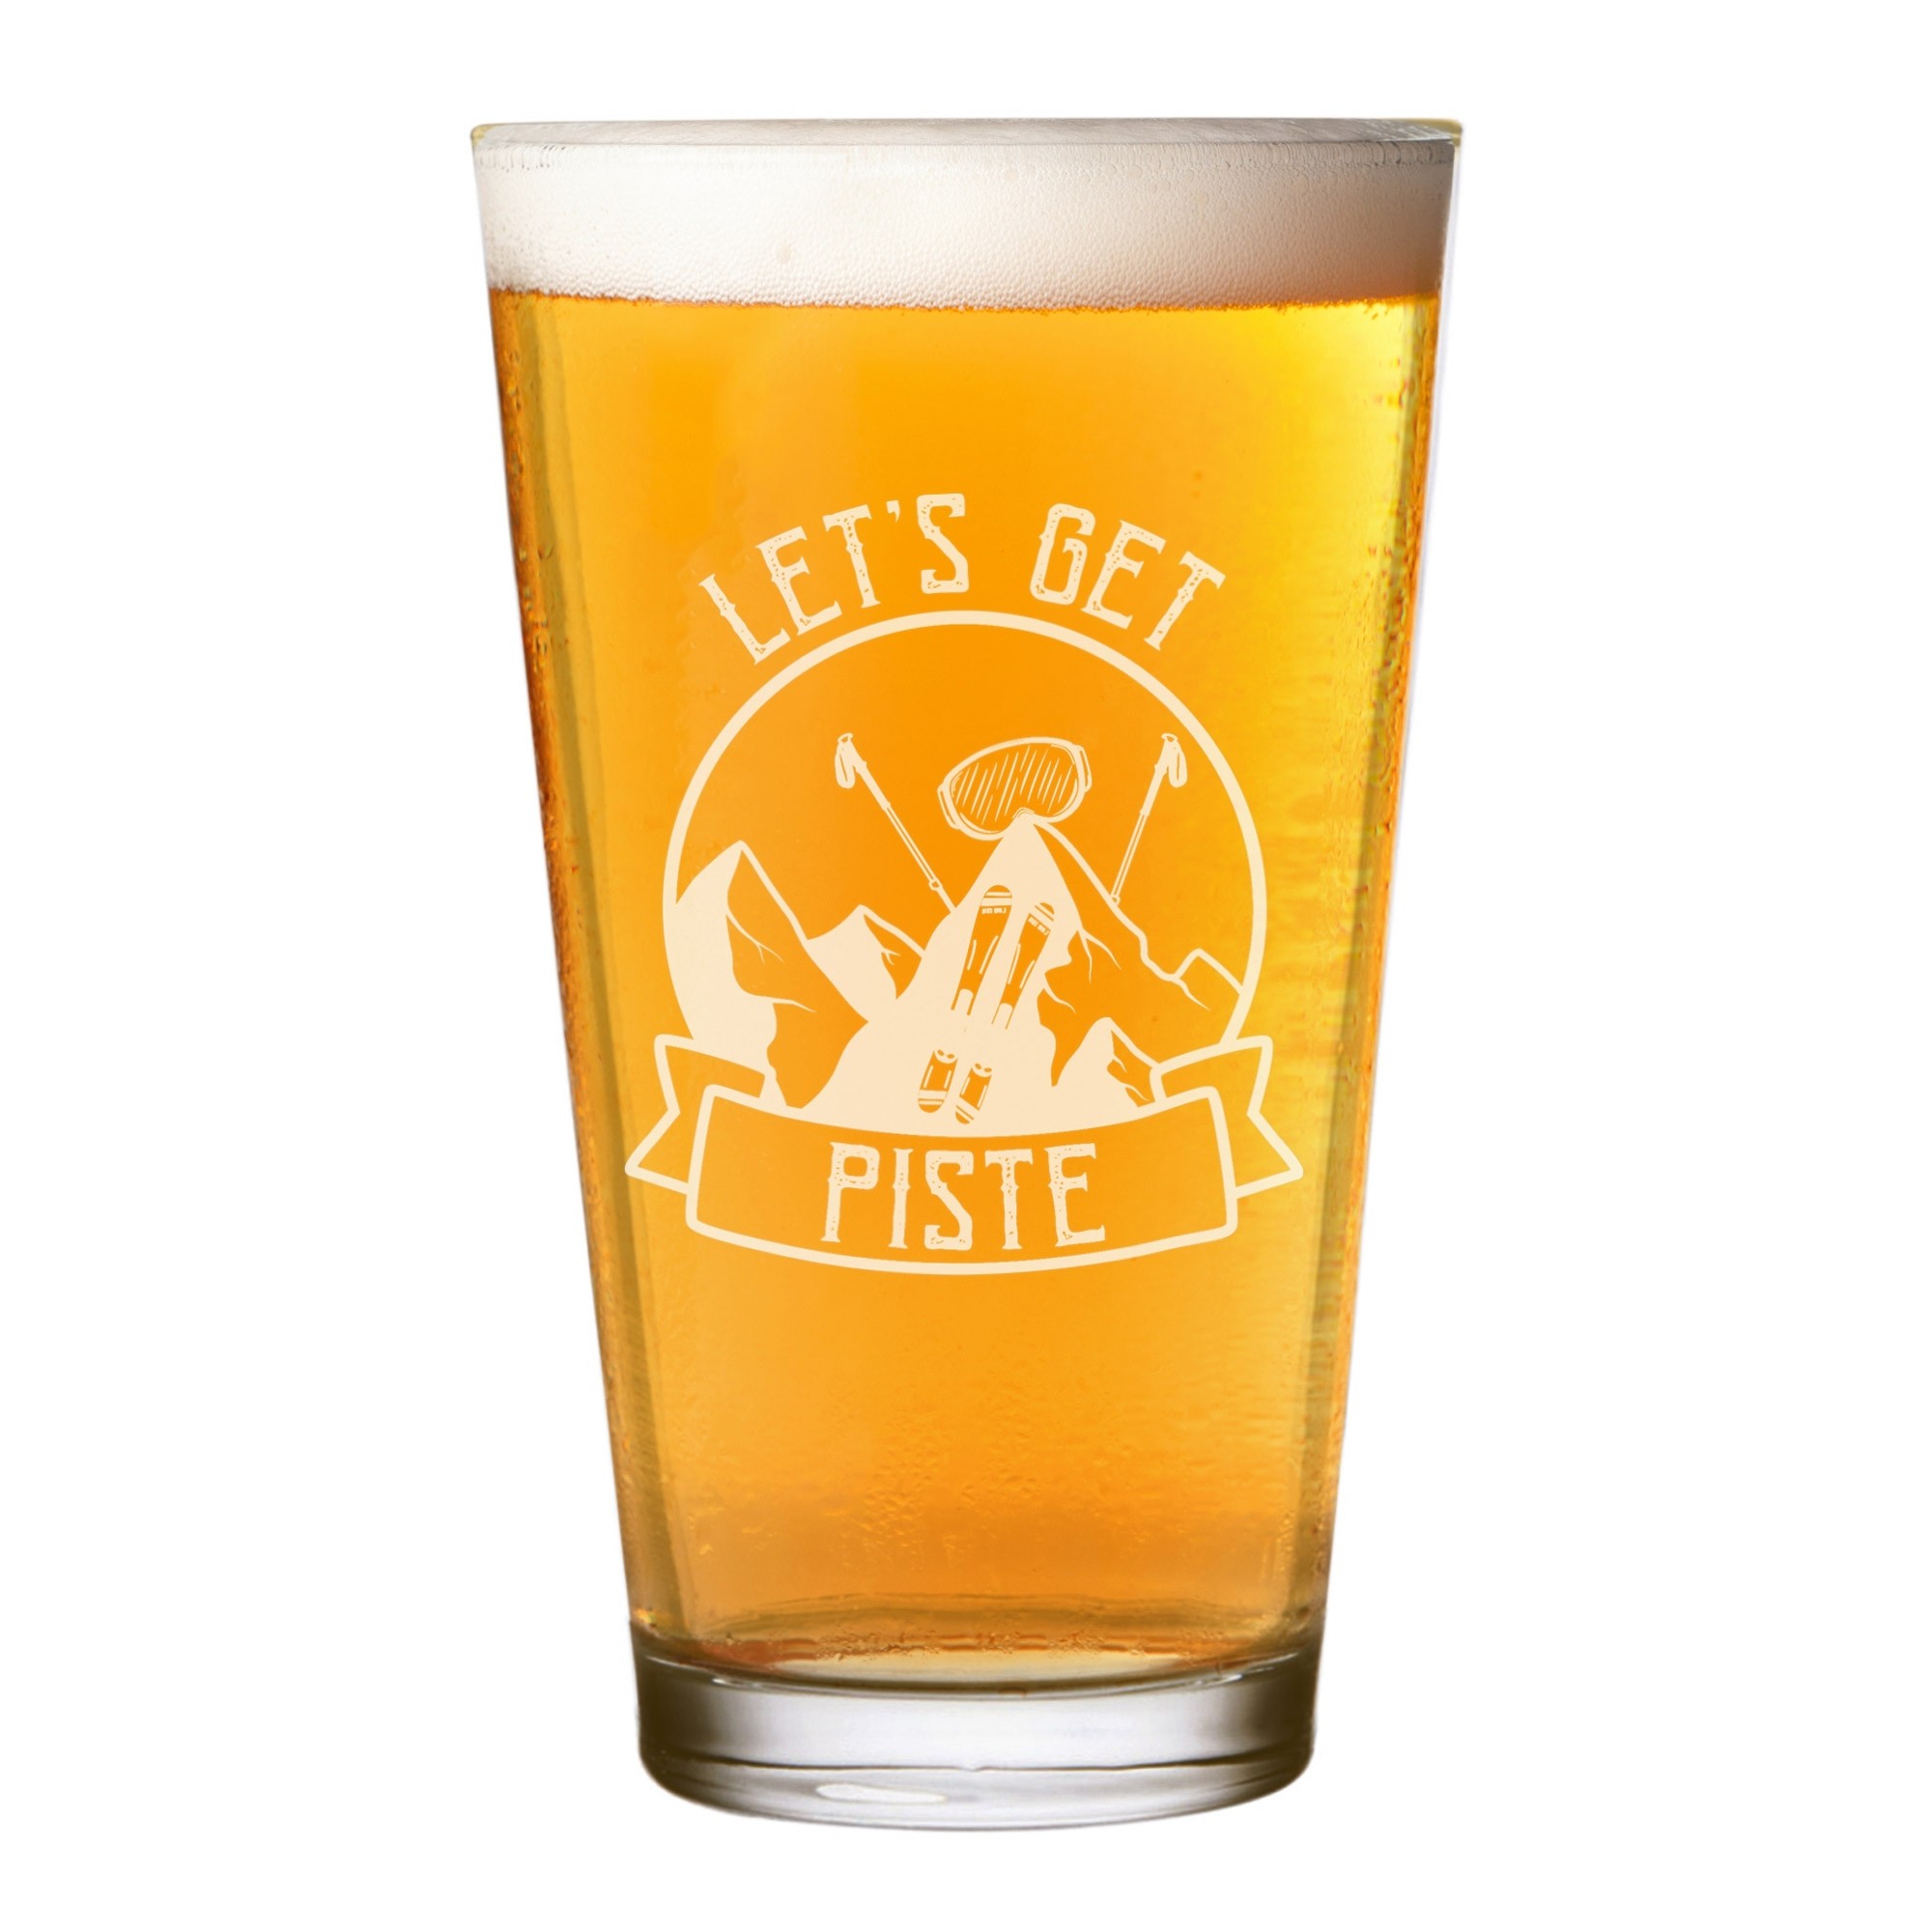 Let's Get Piste Pissed Skiing Pint Glass Shaker Any Name Craft Beer Cider